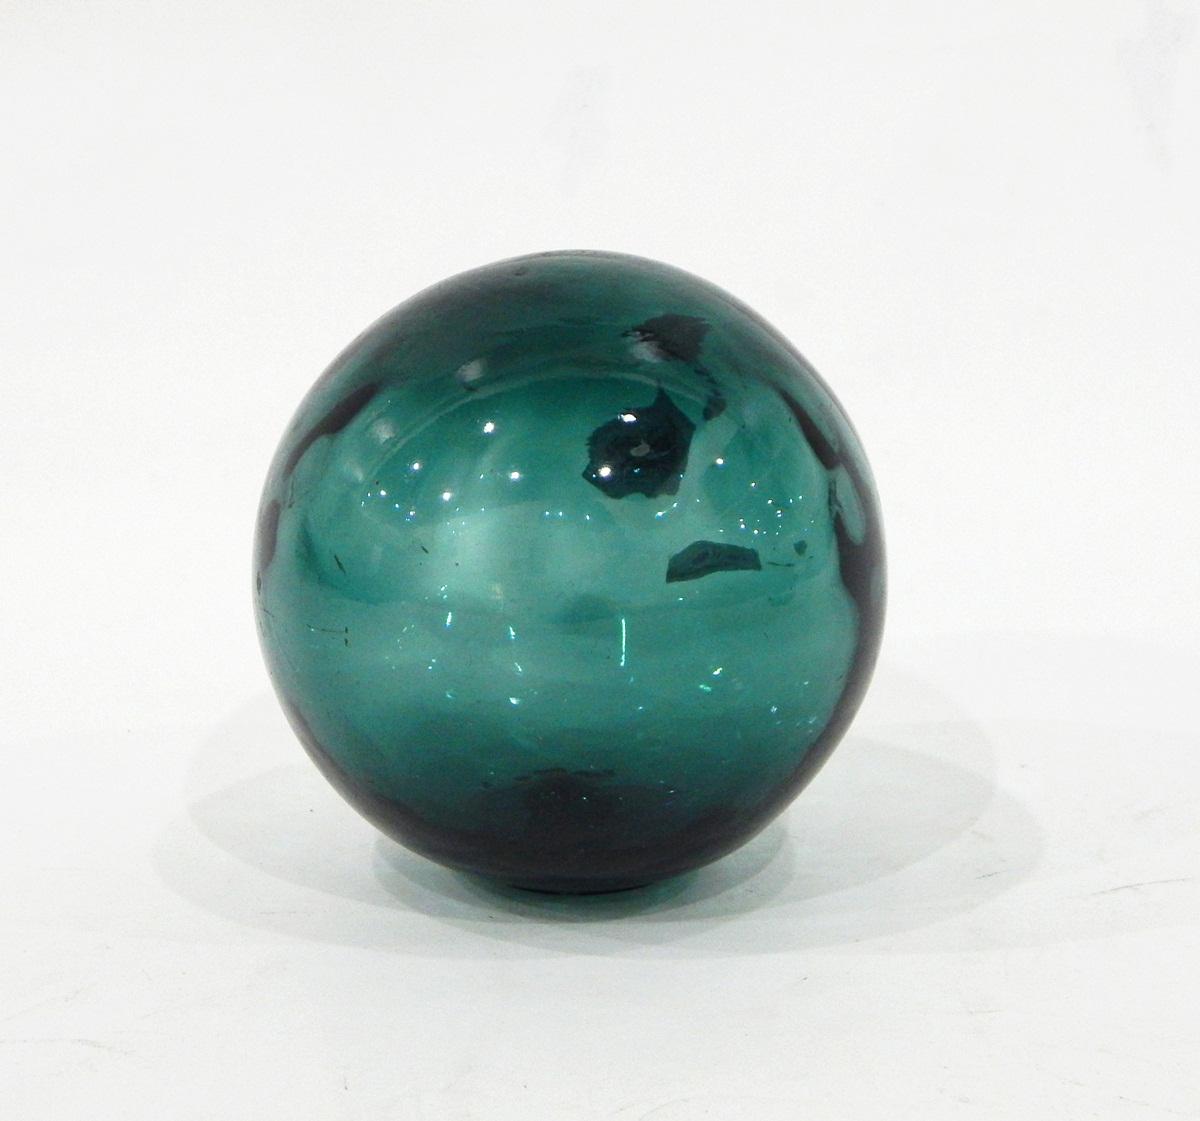 Blue glass fishing float of usual spherical form